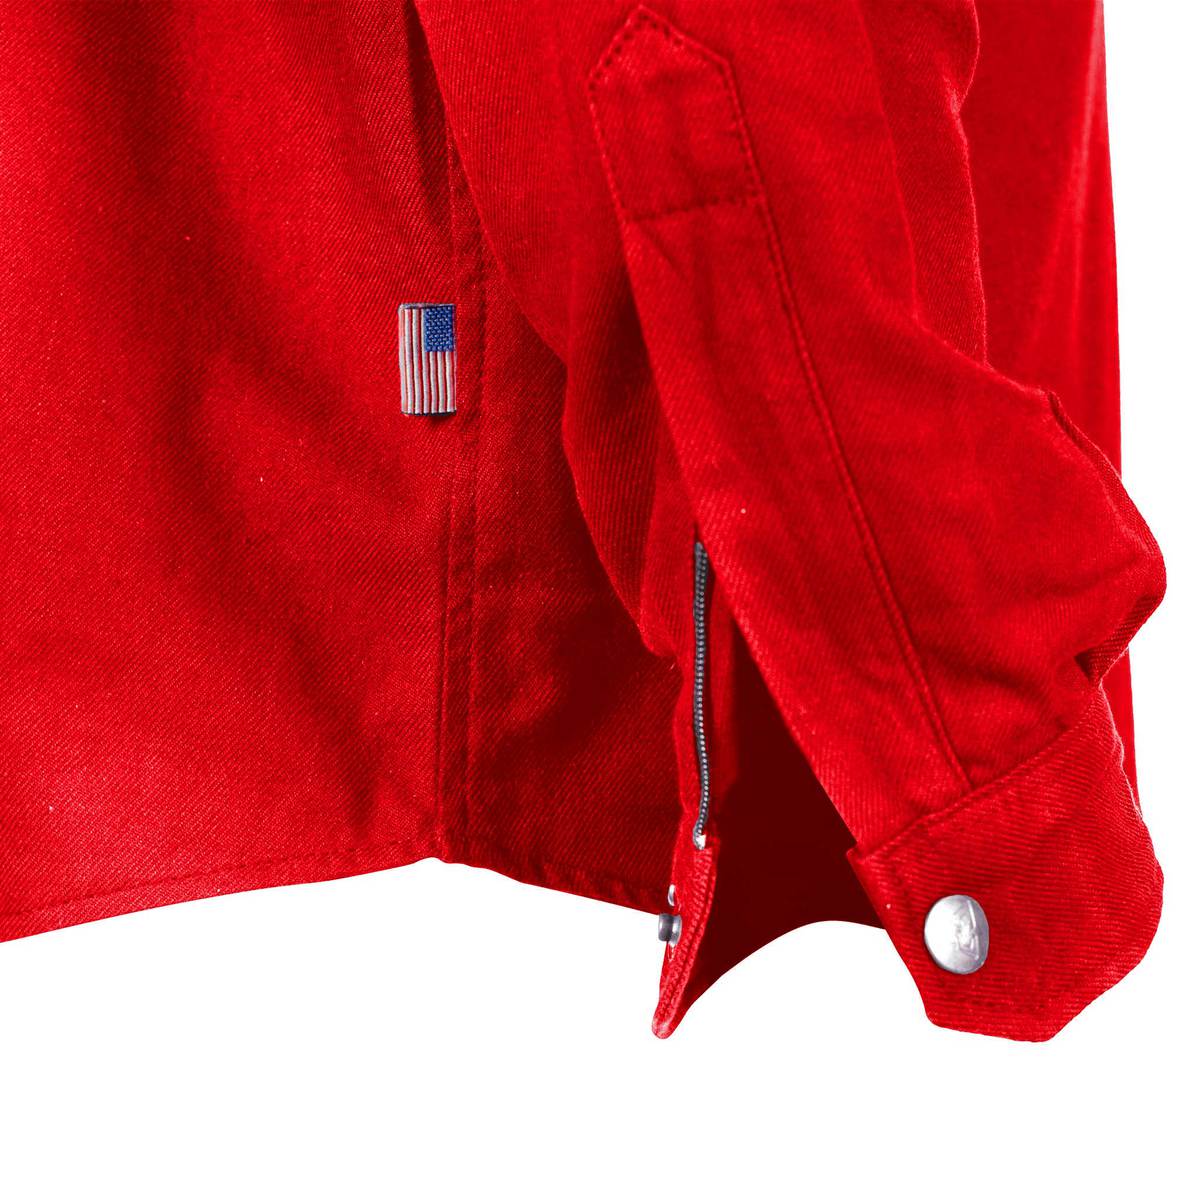 Protective Flannel Shirt with Pads - Red Solid